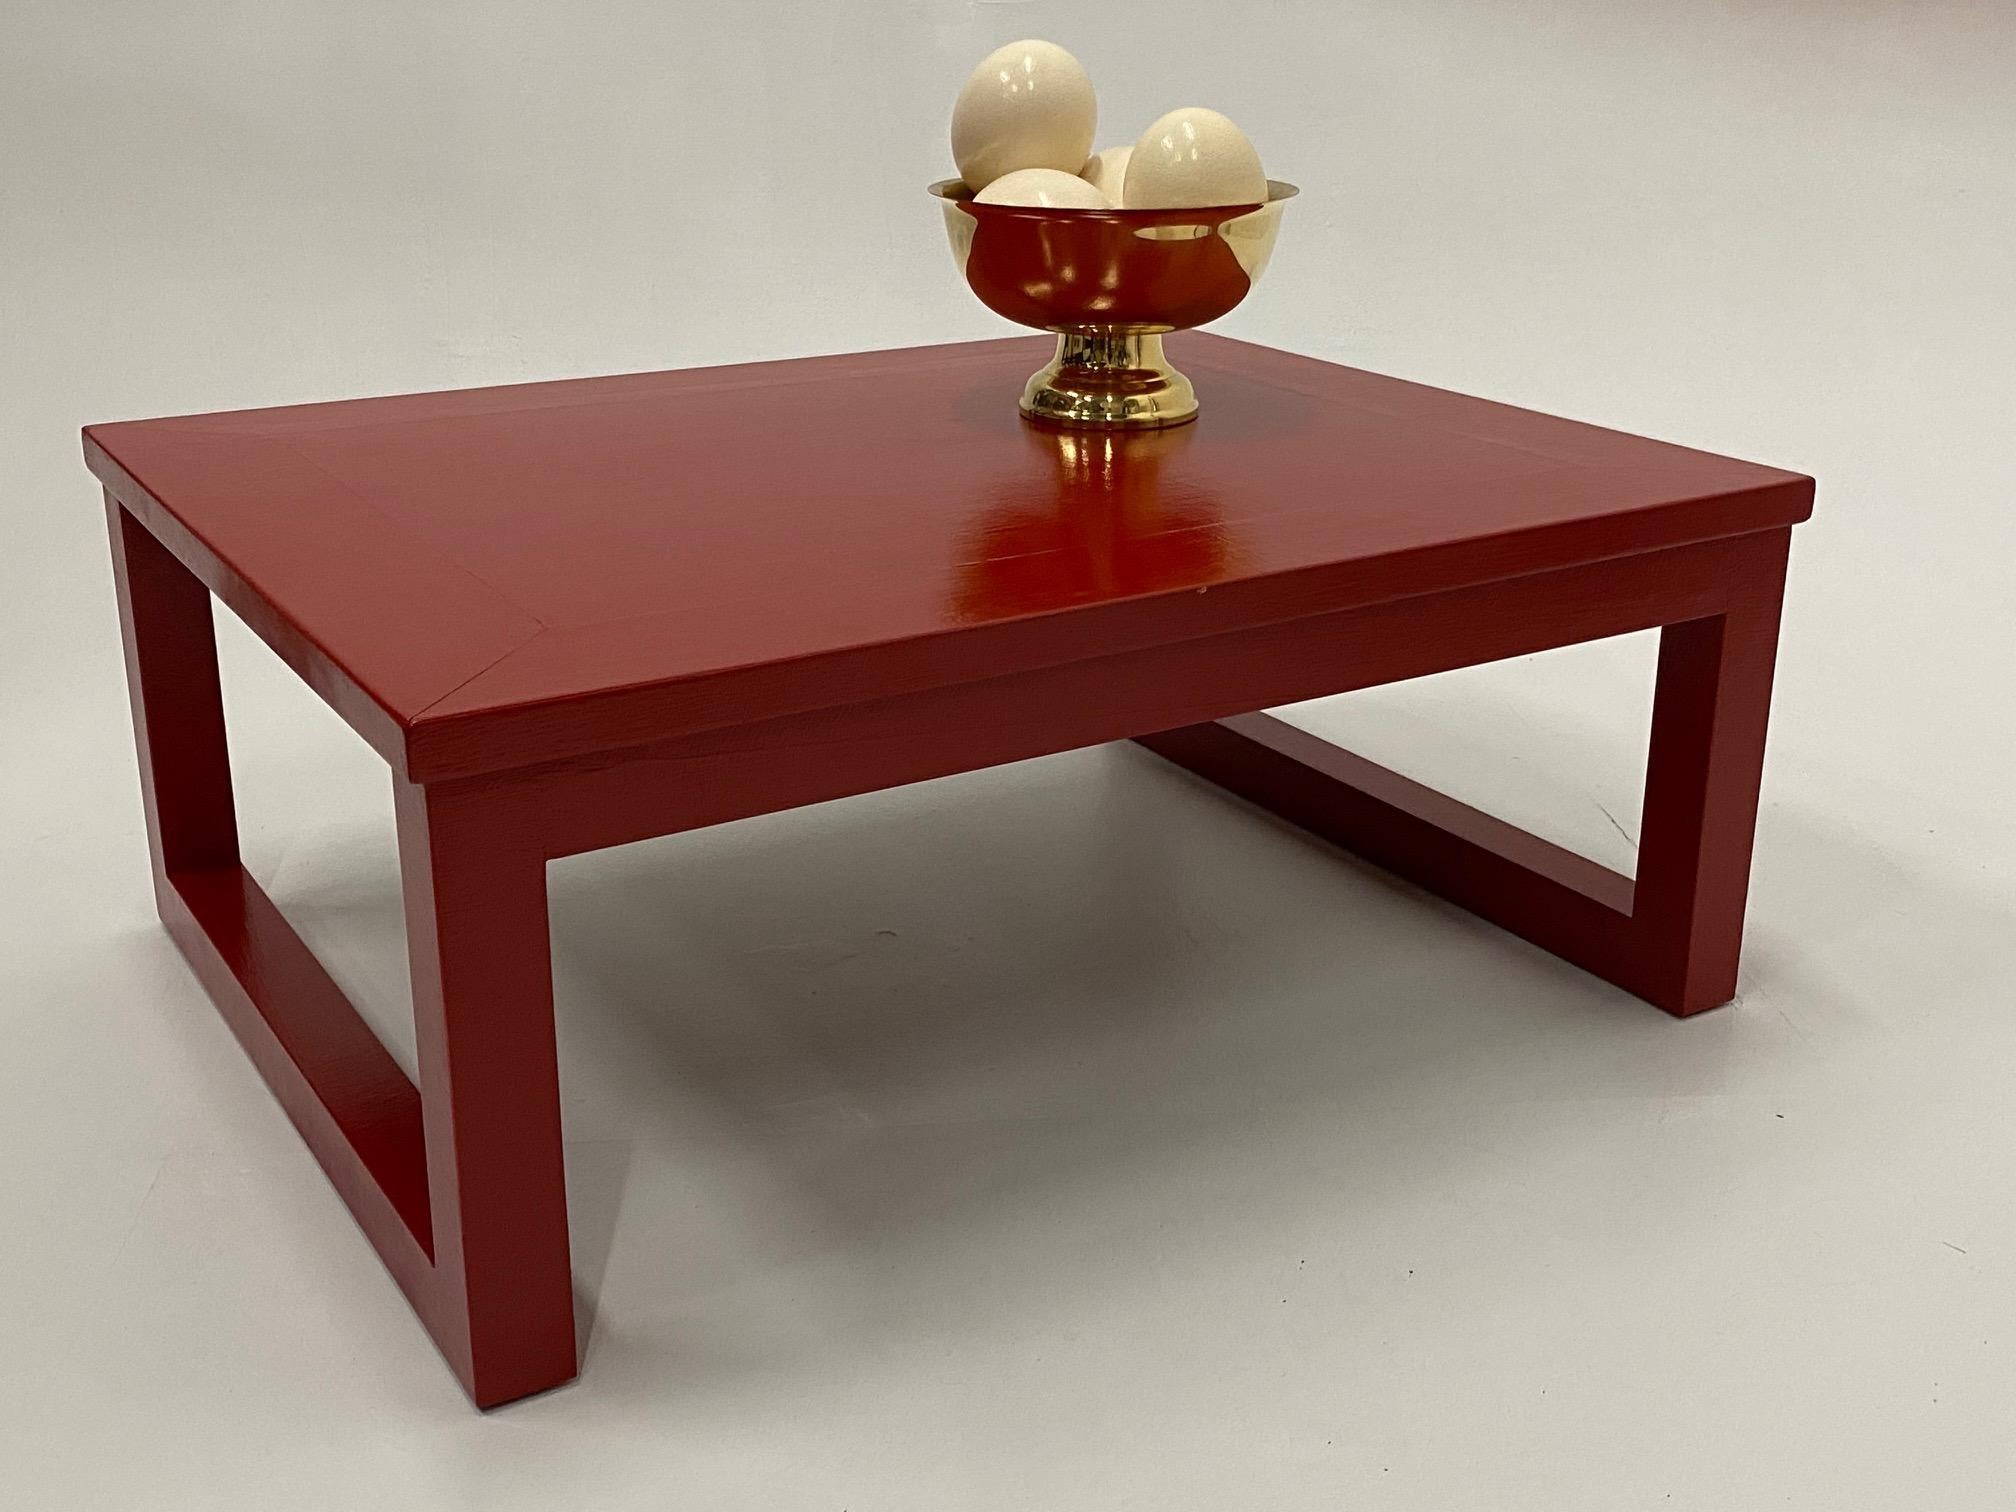 Very chic Mid-Century Modern lacquered grasscloth rectangular coffee table in a fabulous shade of cinnabar red.